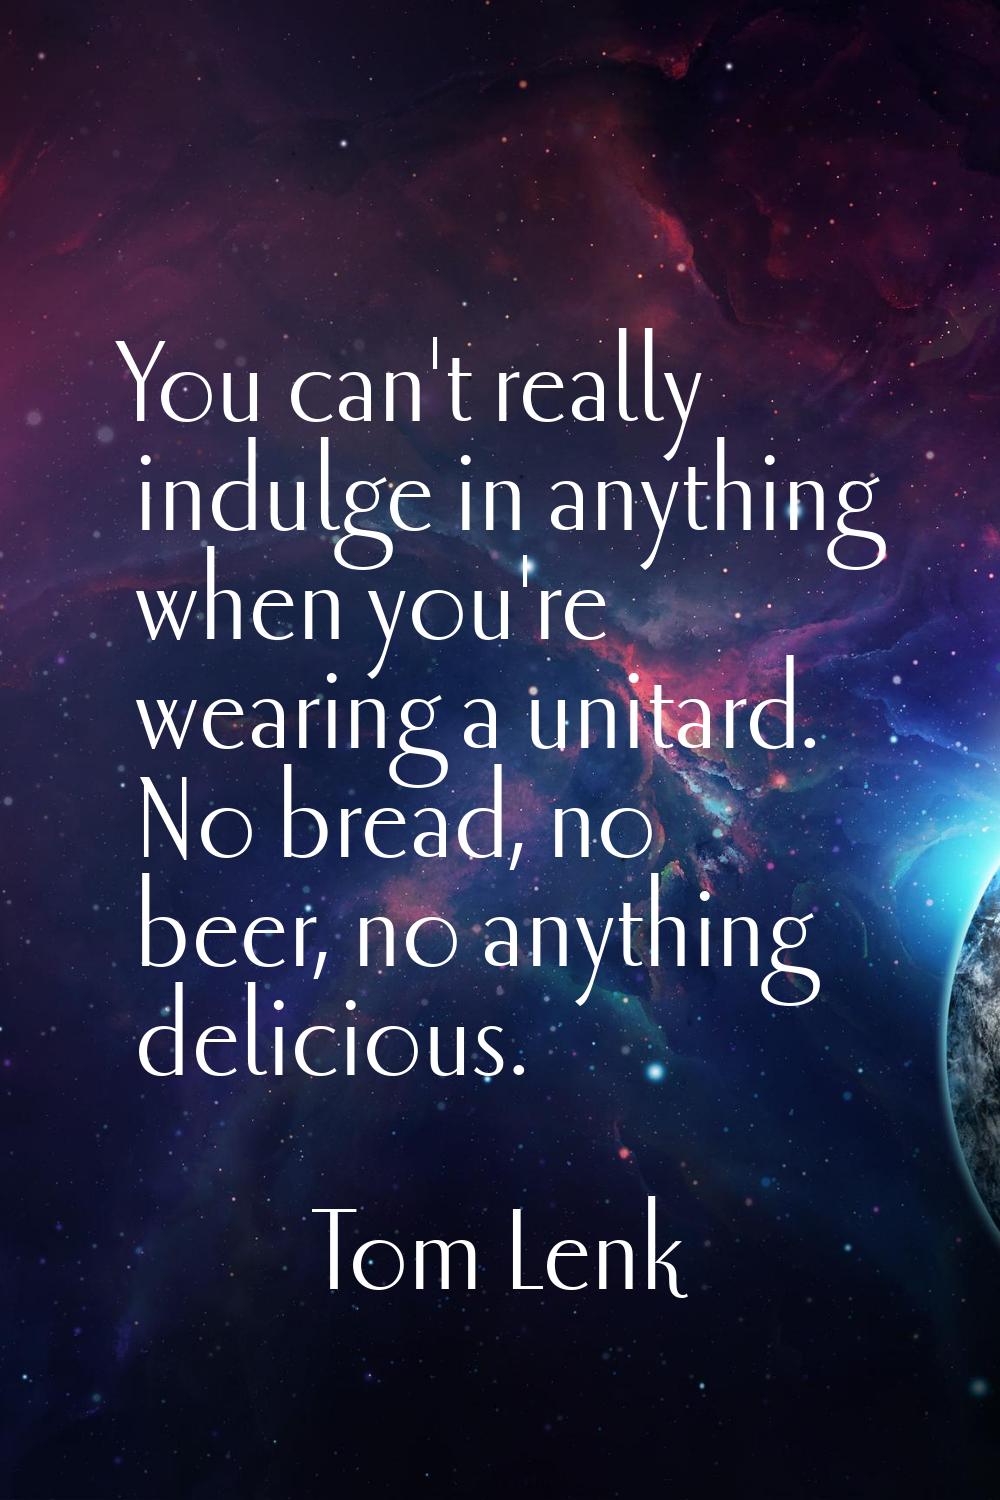 You can't really indulge in anything when you're wearing a unitard. No bread, no beer, no anything 